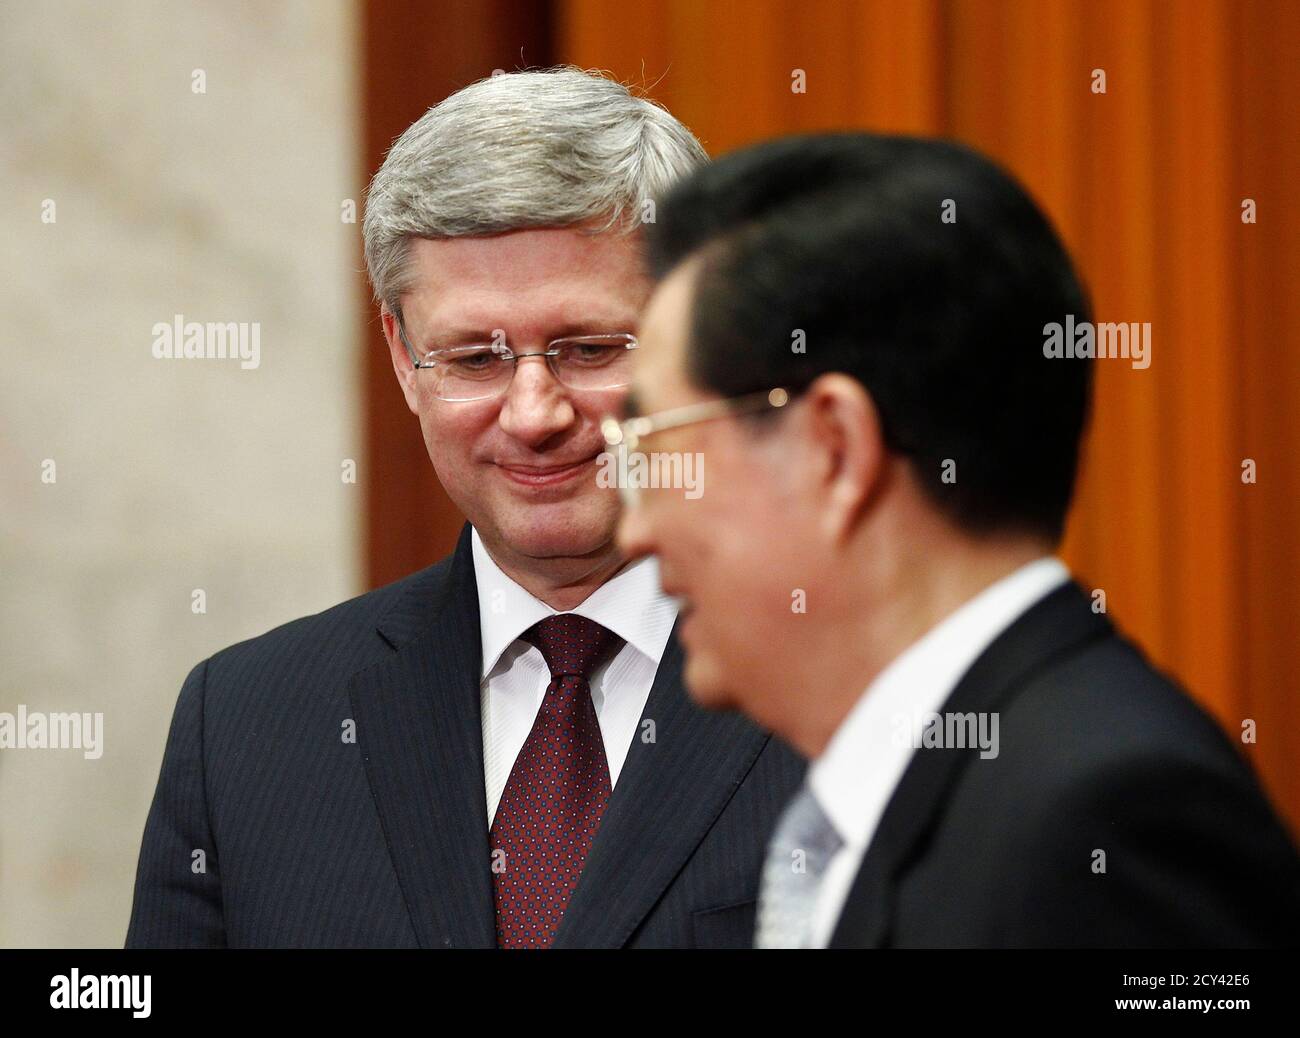 Canada's Prime Minister Stephen Harper (L) meets with China's President Hu Jintao at the Great Hall of the People in Beijing February 9, 2012. China and Canada on Wednesday signed a series of deals to boost modest levels of bilateral trade and finished negotiations on a foreign investment protection pact after 18 years of talks.      REUTERS/Chris Wattie       (CHINA - Tags: POLITICS) Stock Photo